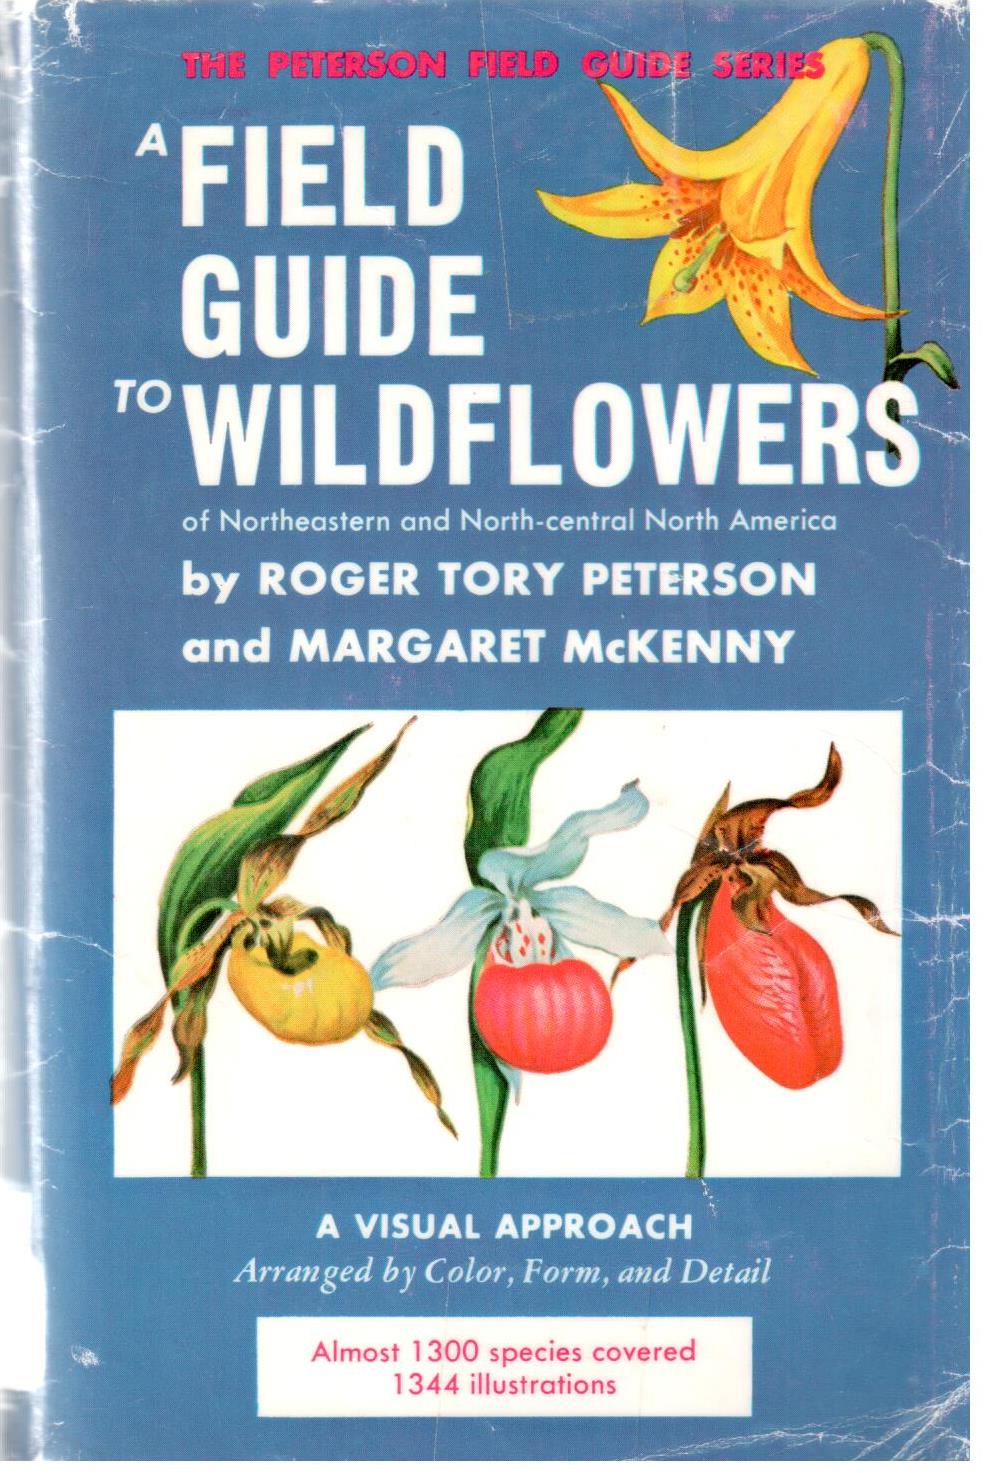 A field guide to wildflowers of Northeastern and North-Central North America;